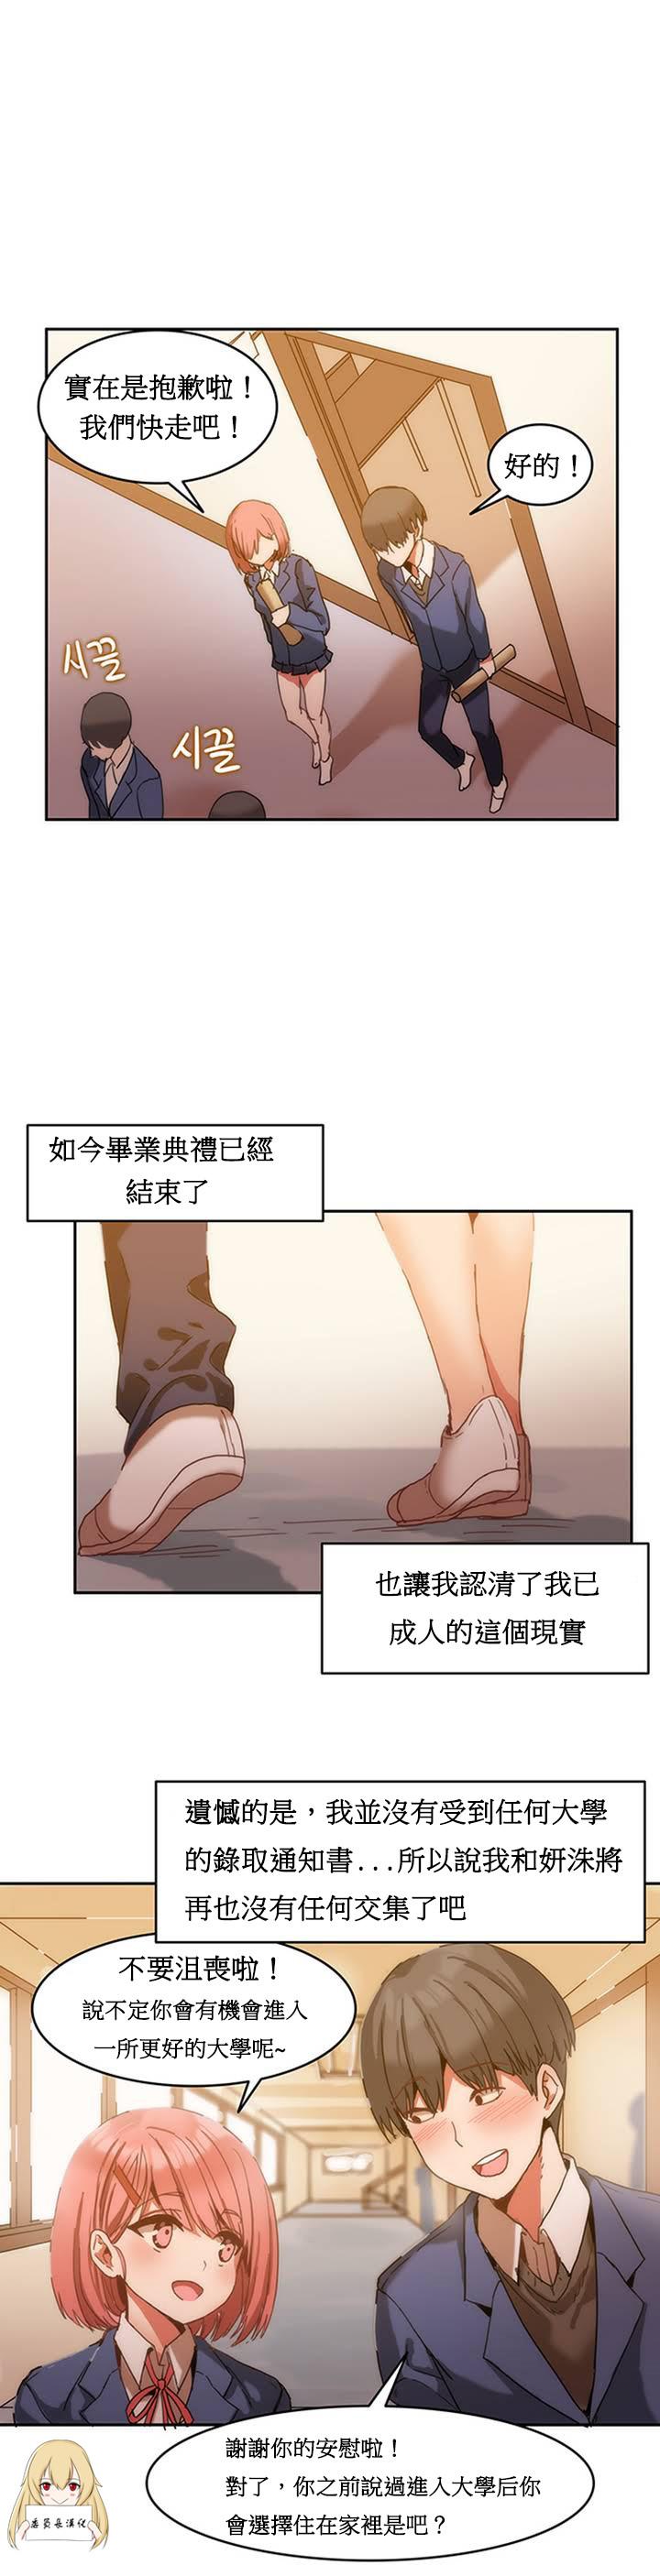 Lima Hahri's Lumpy Boardhouse Ch. 0~24【委員長個人漢化】（持續更新） Long - Page 6